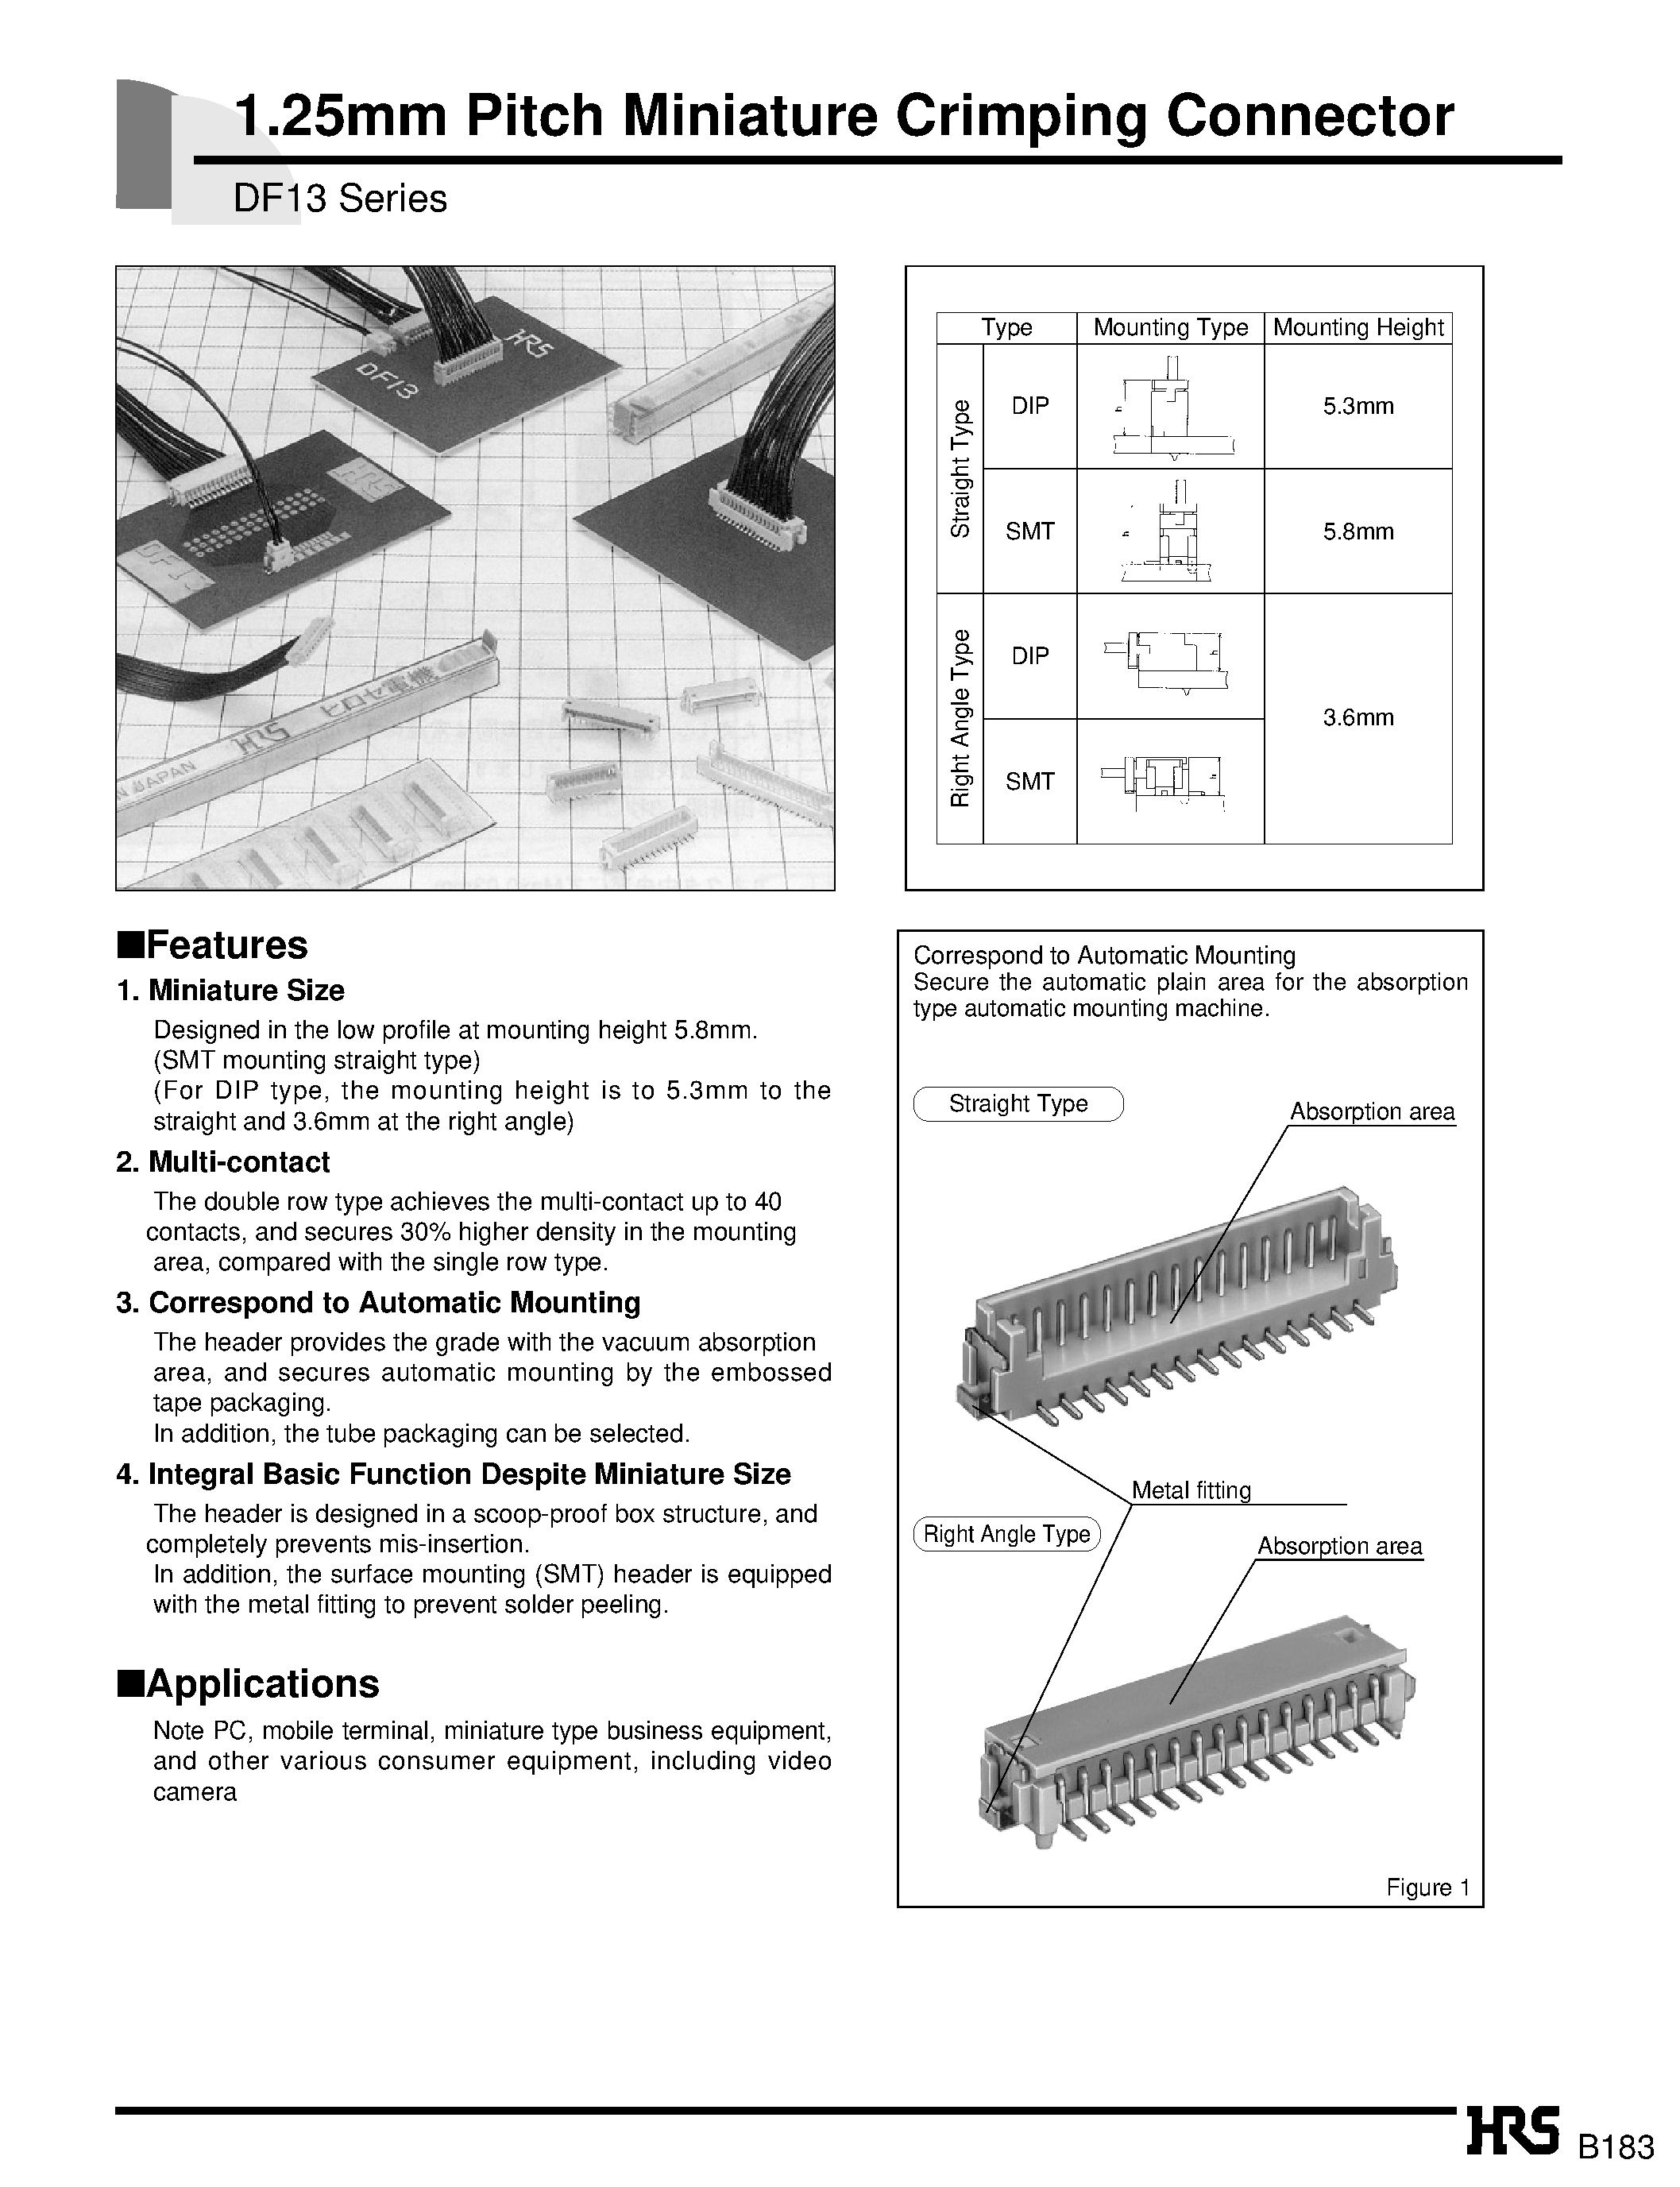 Datasheet DF13-10S-1.25DSA - 1.25mm Pitch Miniature Crimping Connector page 1